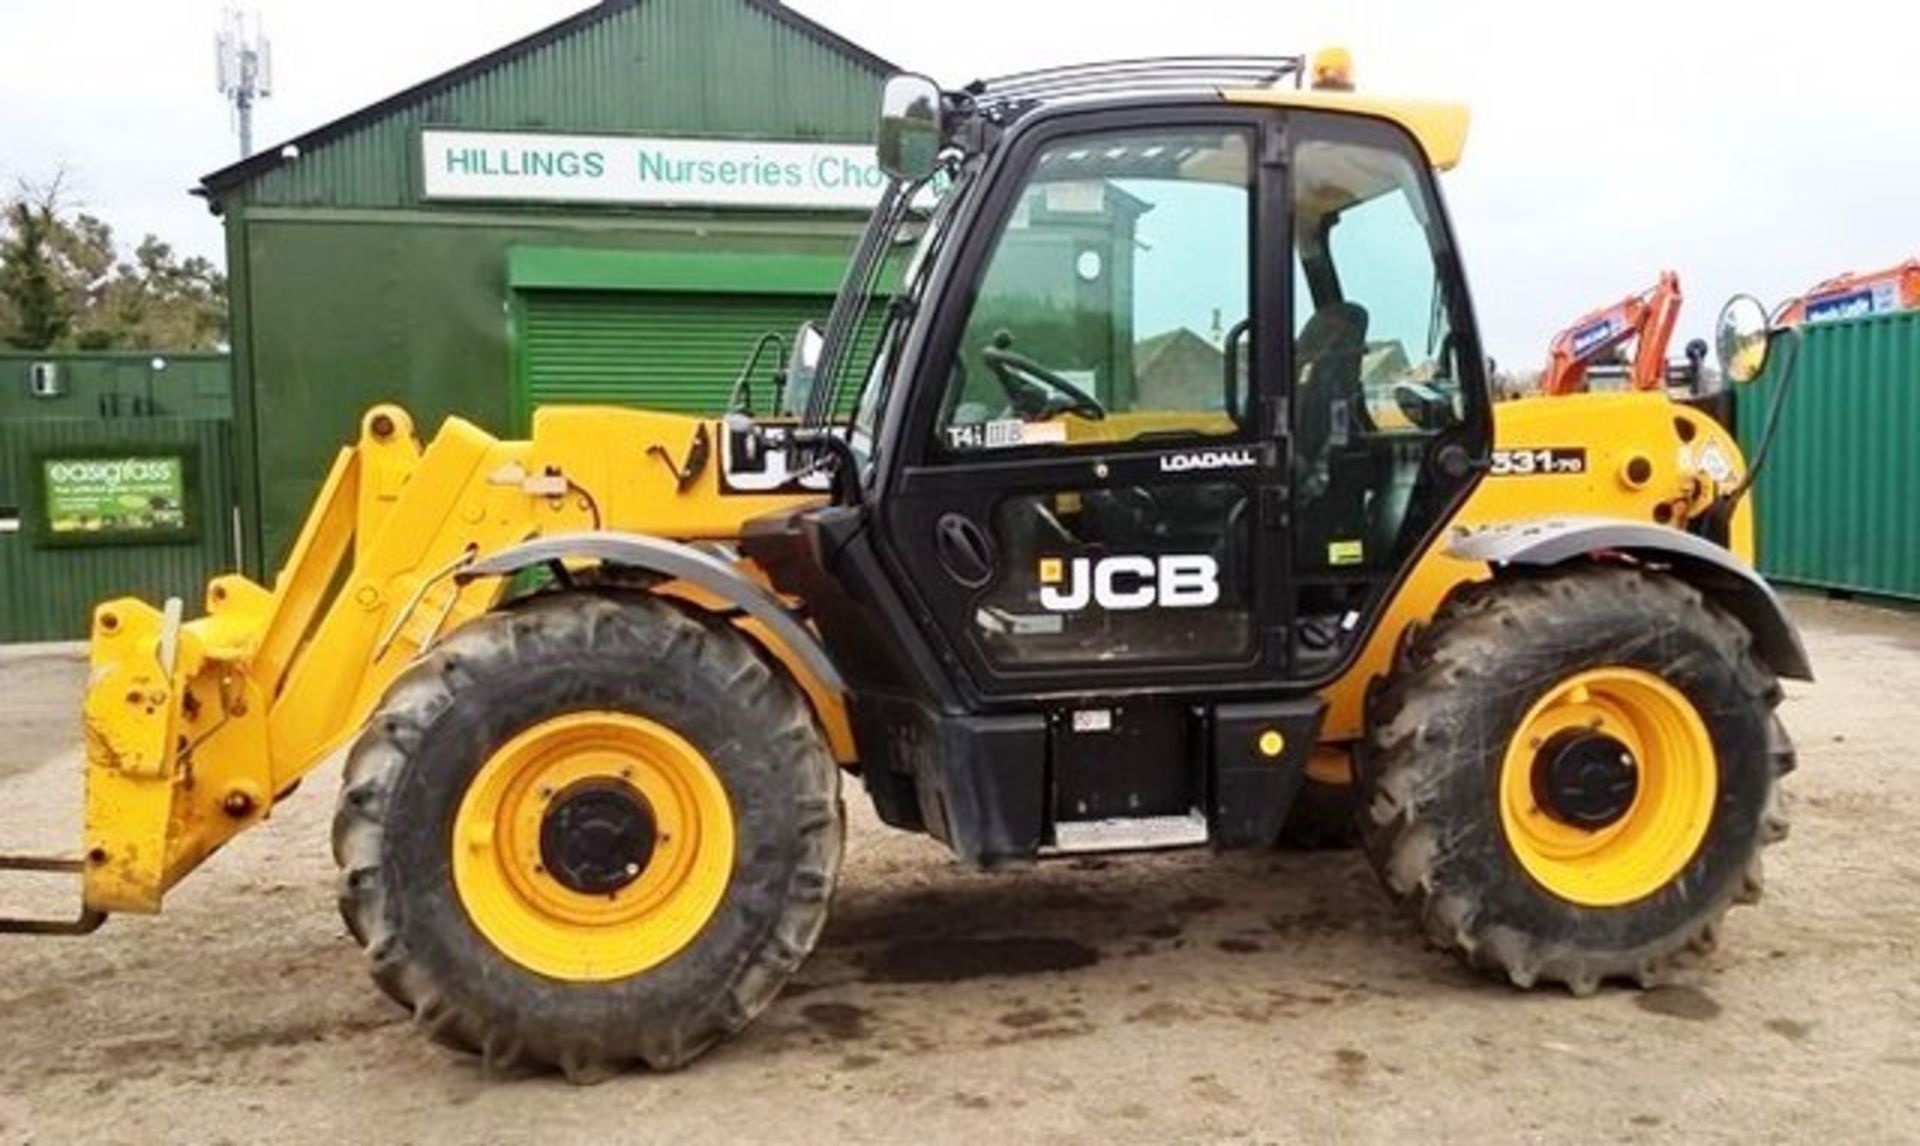 2014 JCB 531-70 TELEHANDLER, SN 2181521, 1399 HOURS, AUX PIPE WORK, MANUAL QUICK HITCH, 60% TYRE - Image 12 of 13